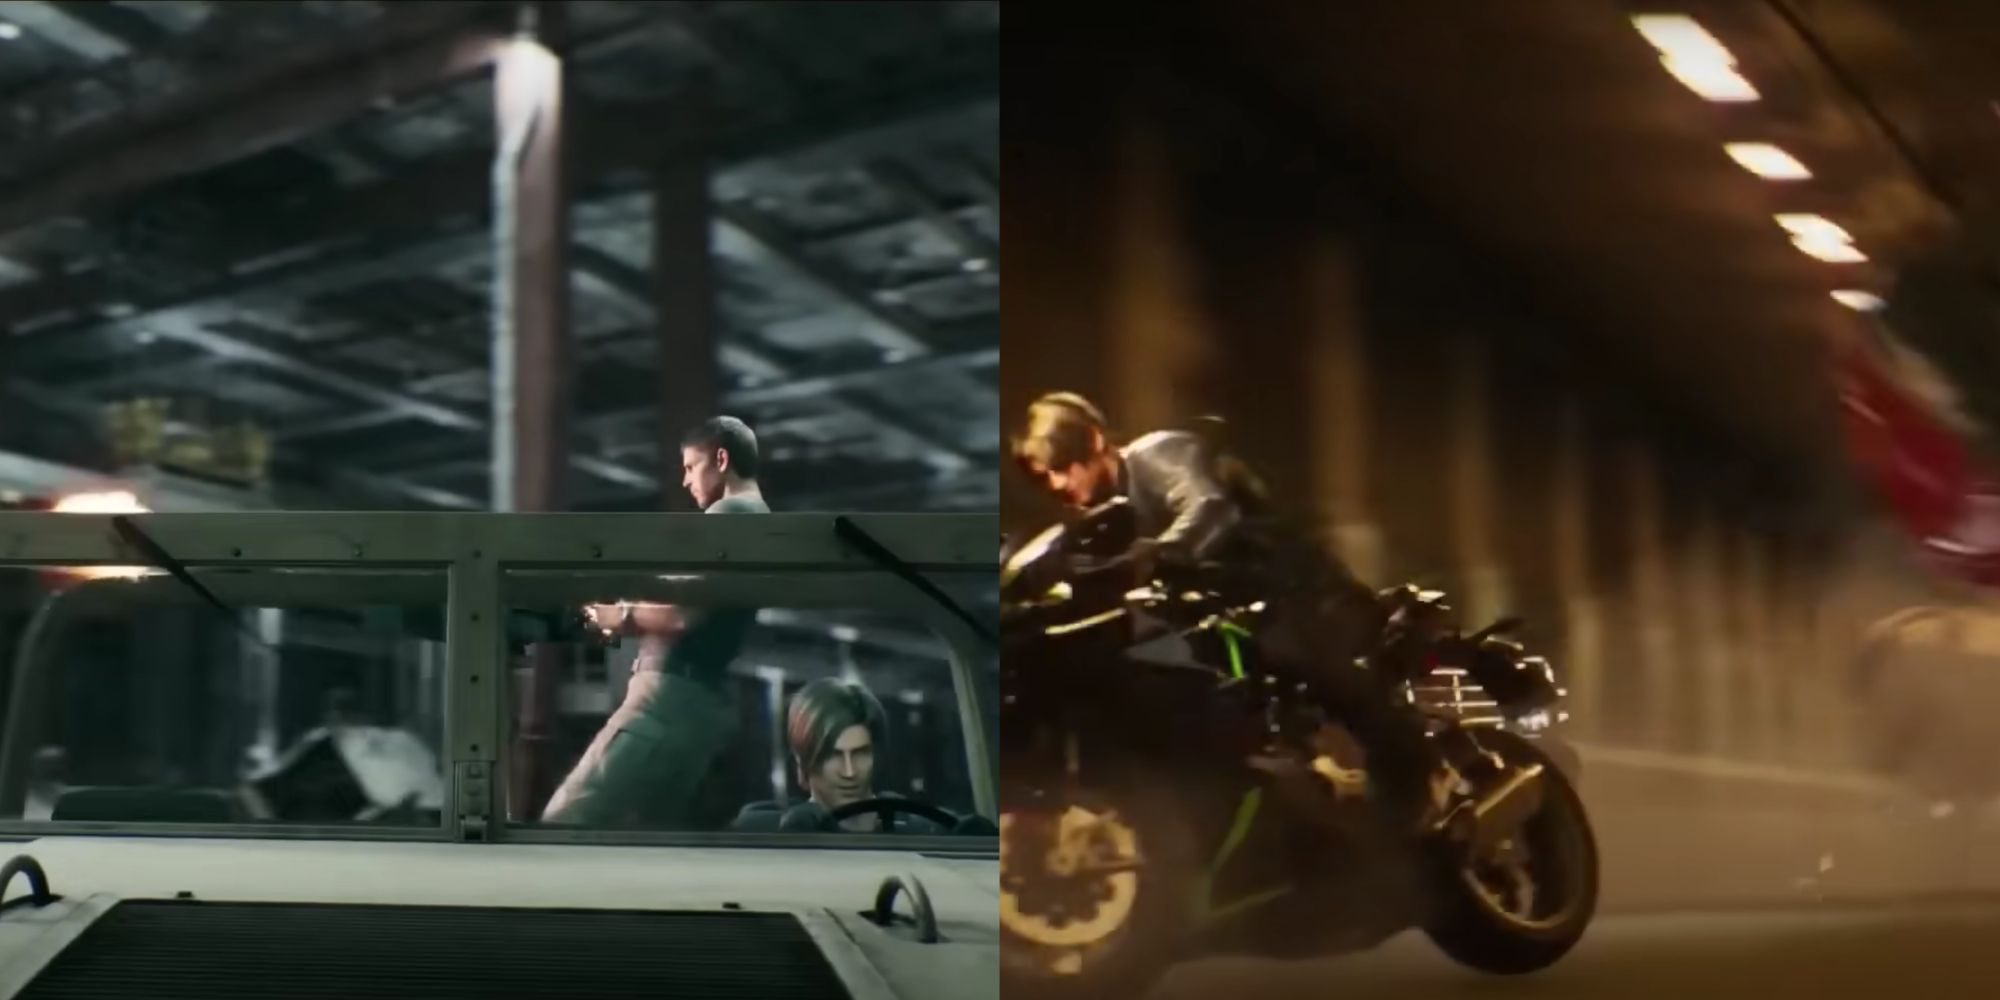 Split image of Leon driving a humvee with Chris controlling a gun in the back and Leon riding a motorcycle in a tunnel dodging a red car.